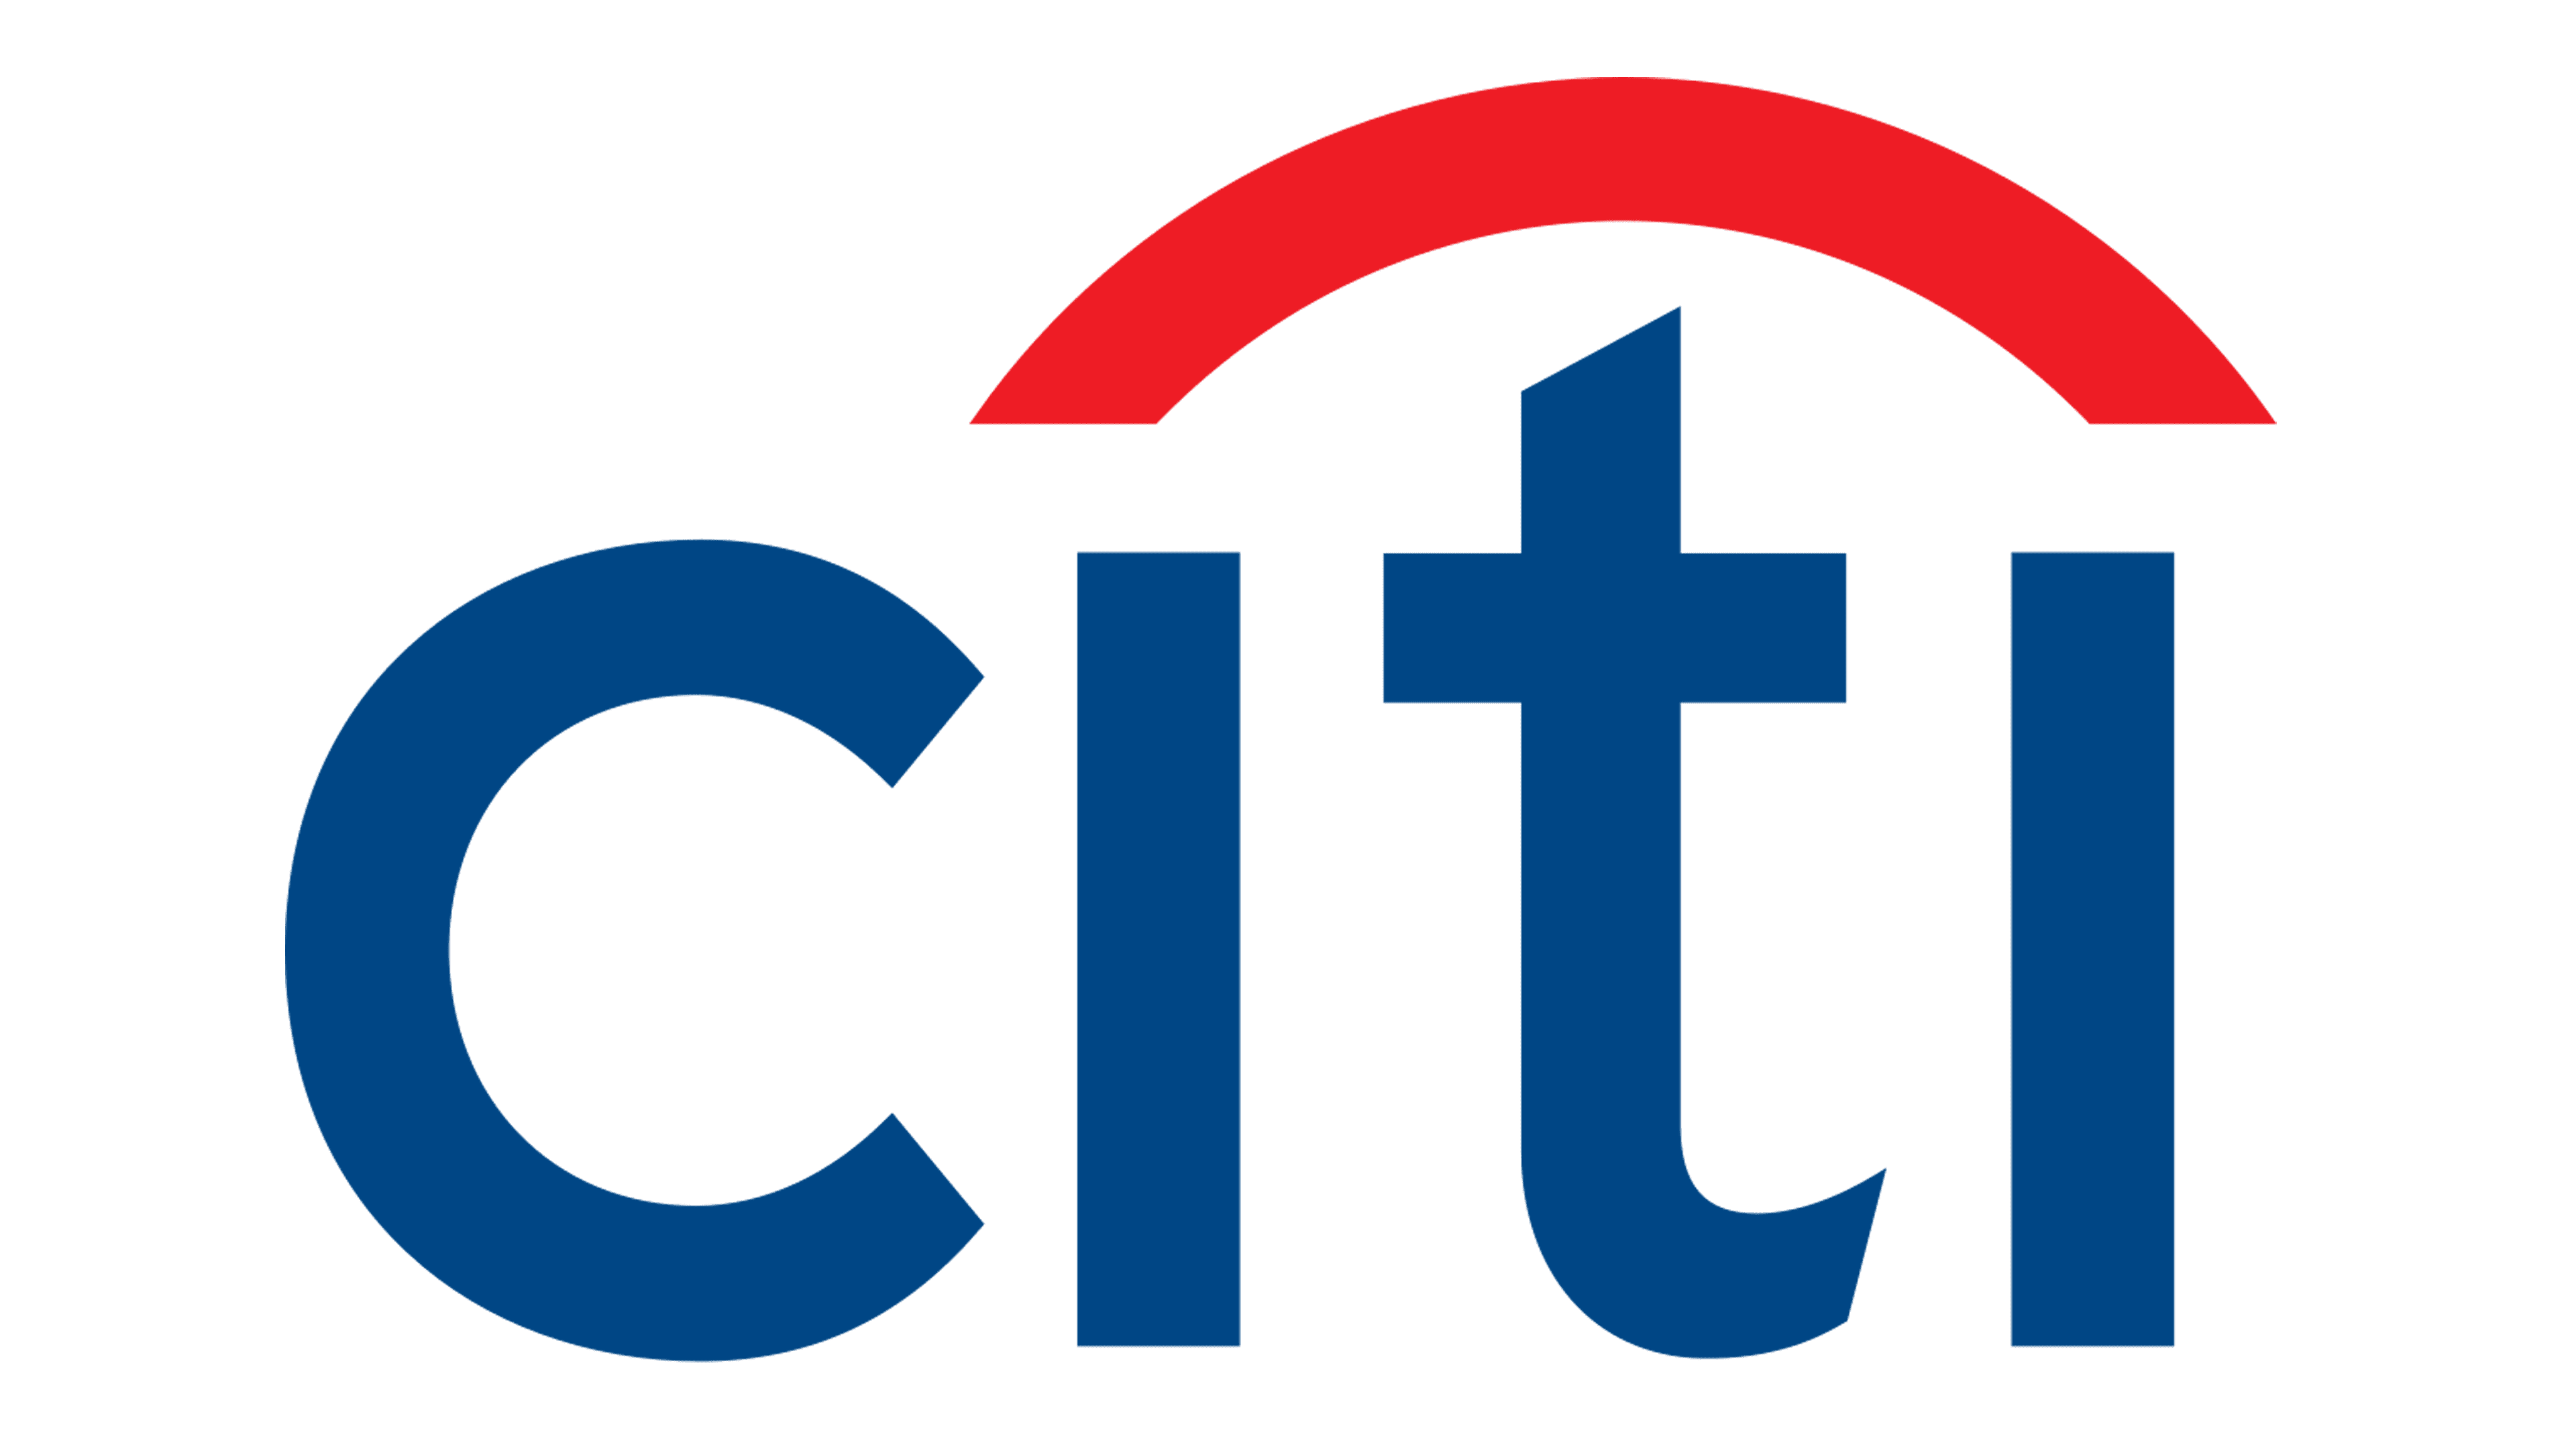 Citi logo and symbol, meaning, history, PNG